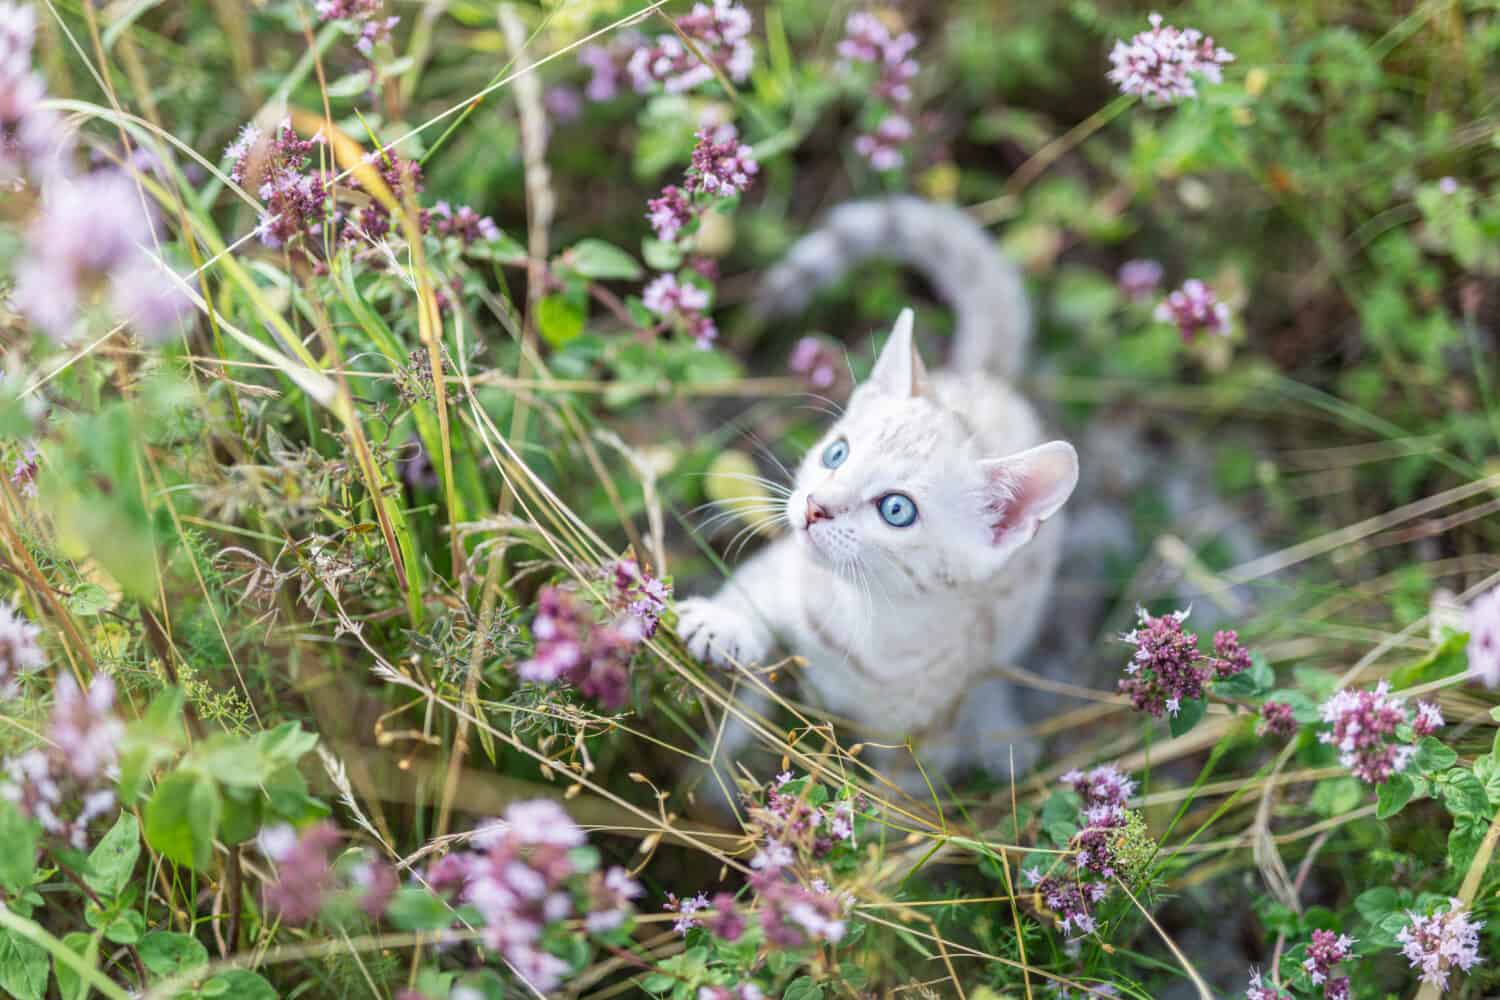 A cute white little Snow Bengal kitten outdoors surrounded by purple flowers, oregano herb. The curious little cat is 7 weeks old. The cat is centered with room for text.